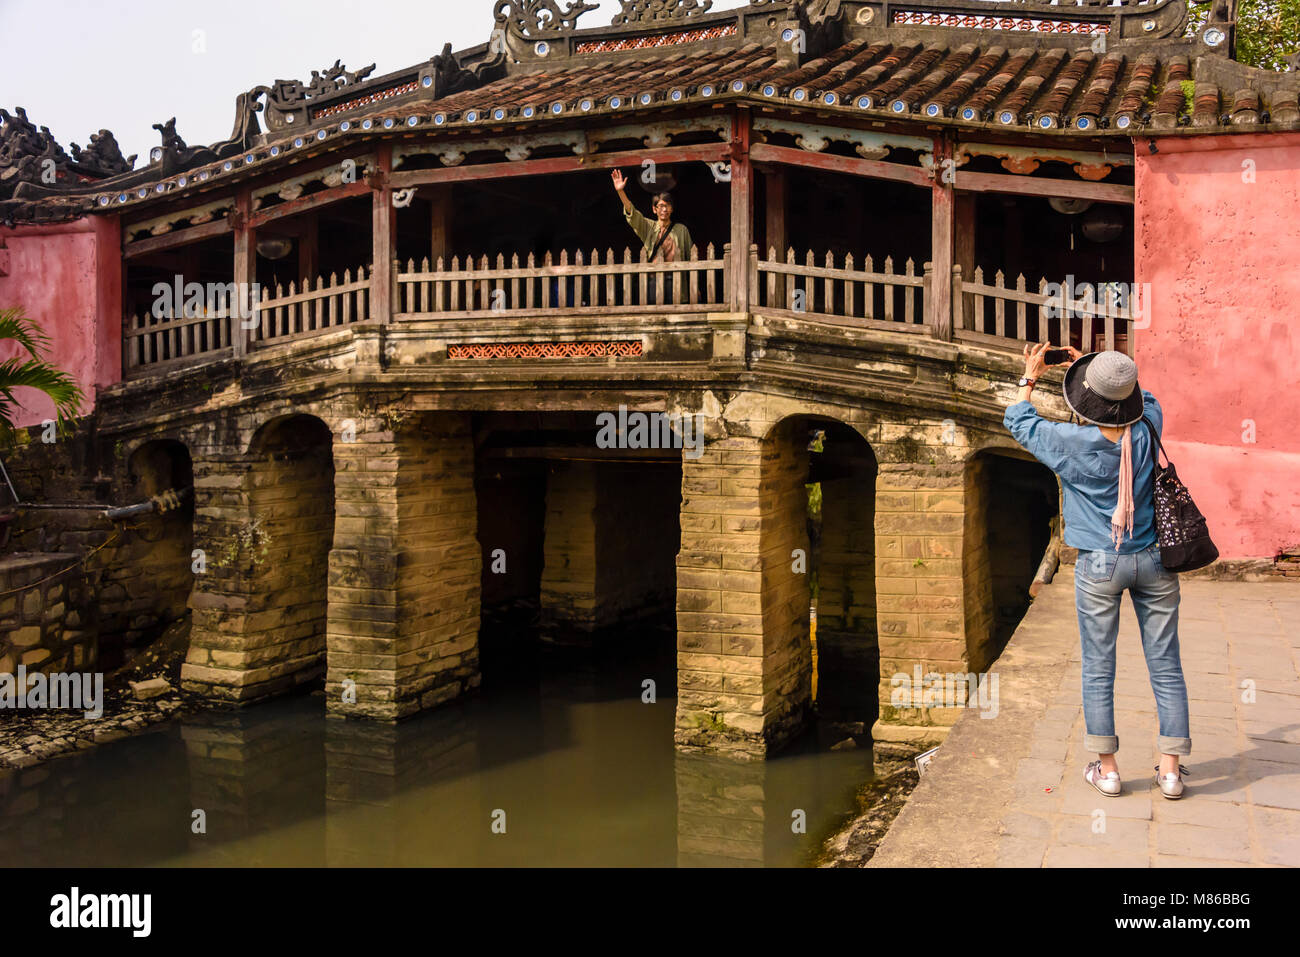 A woman takes a photograph of her husband on the Chùa Cầu Japanese bridge, an 18th century carved wooden bridge which incorporates a shrine, in Hoi An, Vietnam Stock Photo